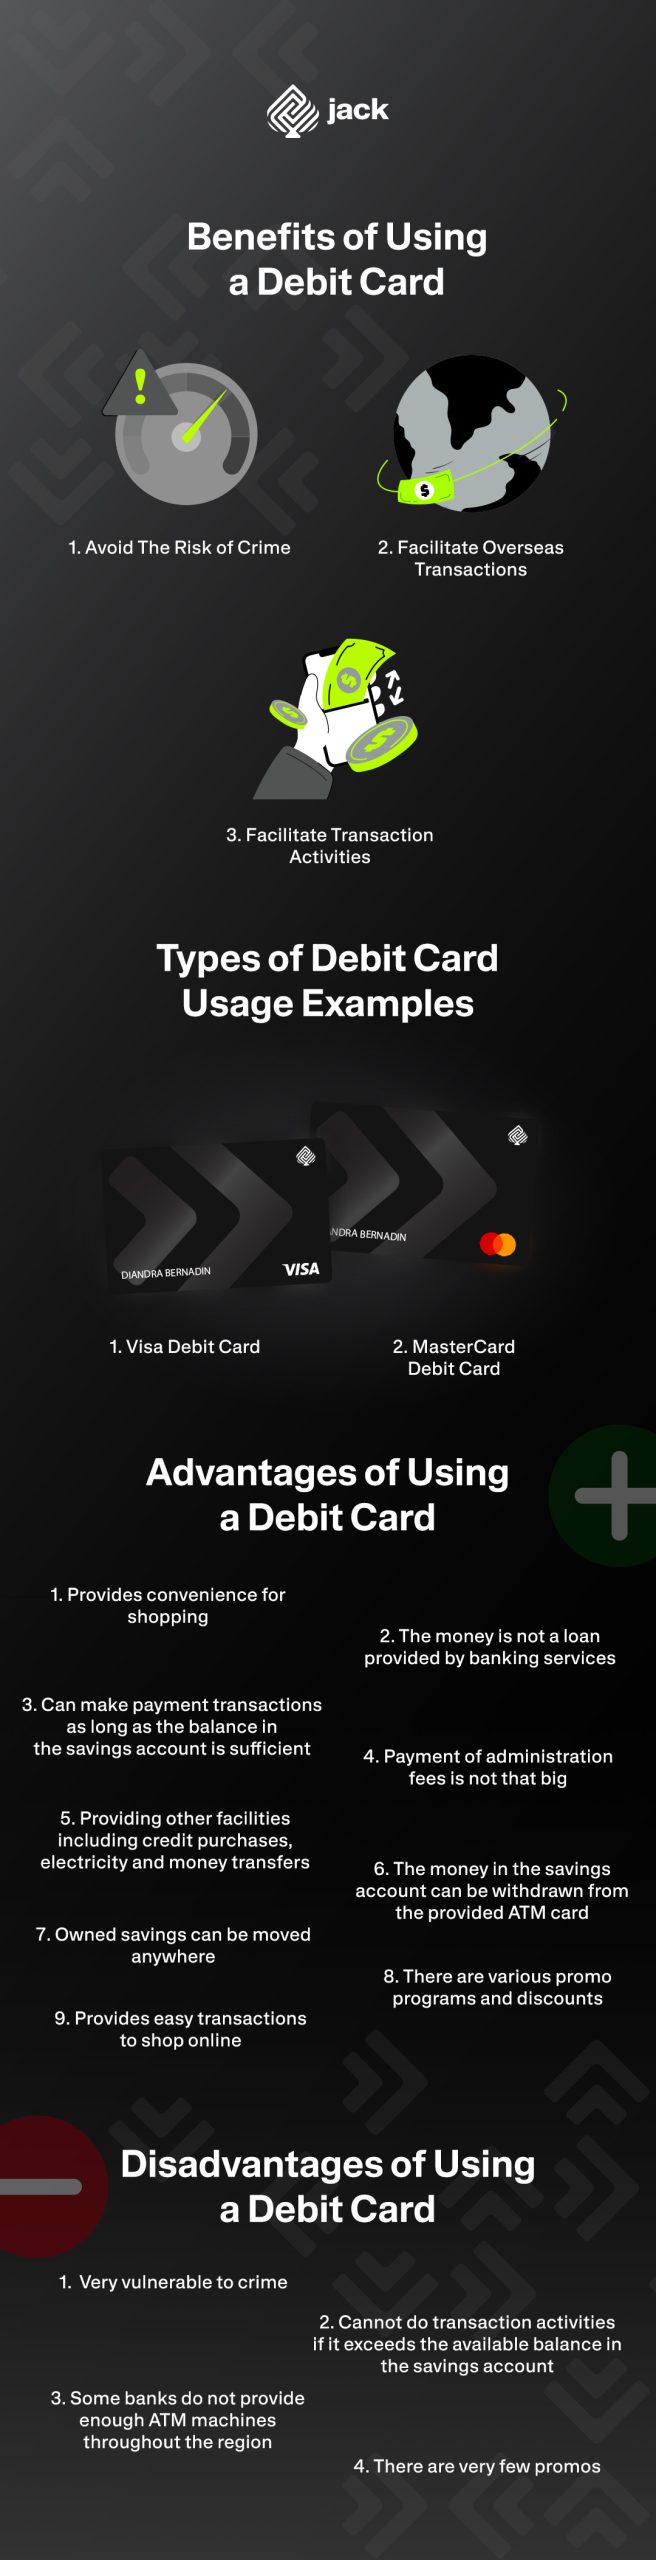 Benefits of Using a Debit Card in Infographic